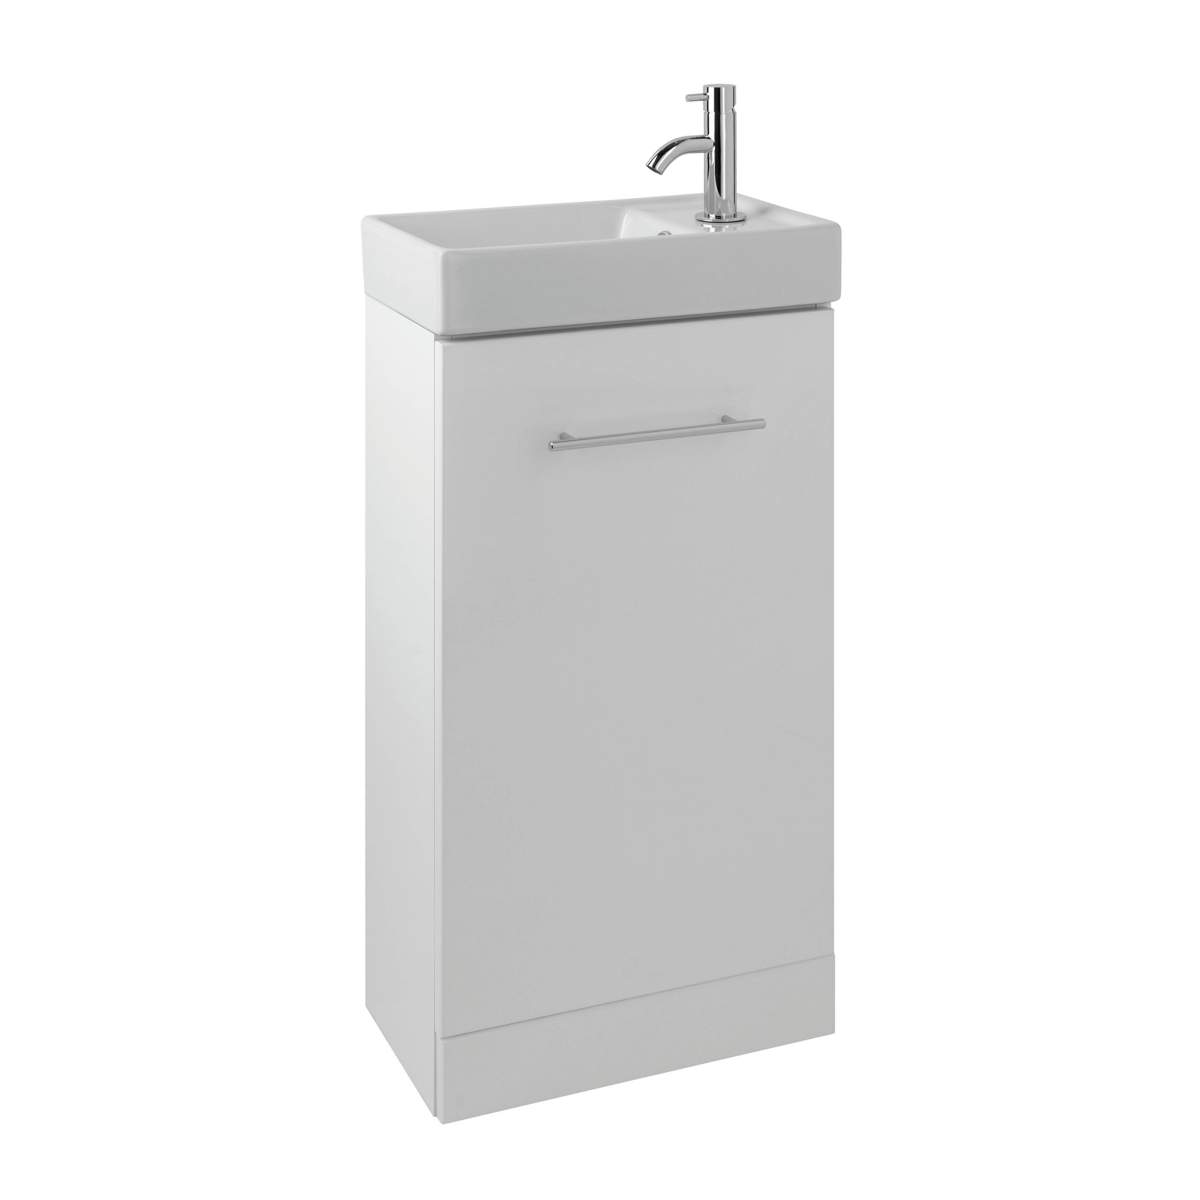 JTP Pace Units 400mm Floor Mounted Unit with Basin in White (PFS402W + P400BS)